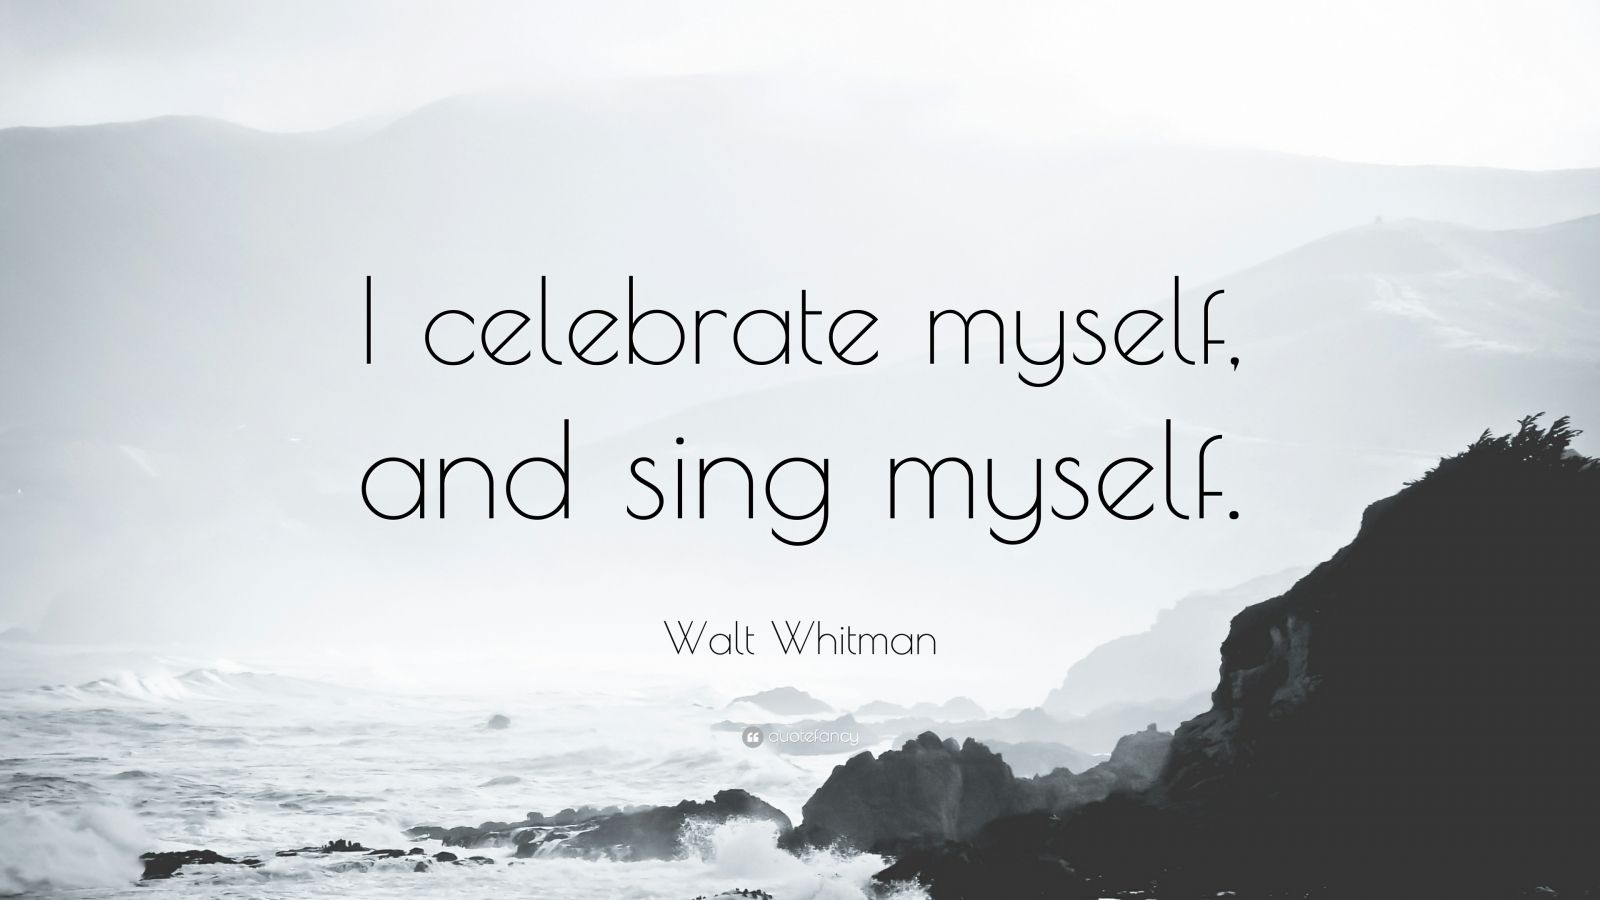 Walt Whitman Quote: "I celebrate myself, and sing myself." (12 wallpapers) - Quotefancy